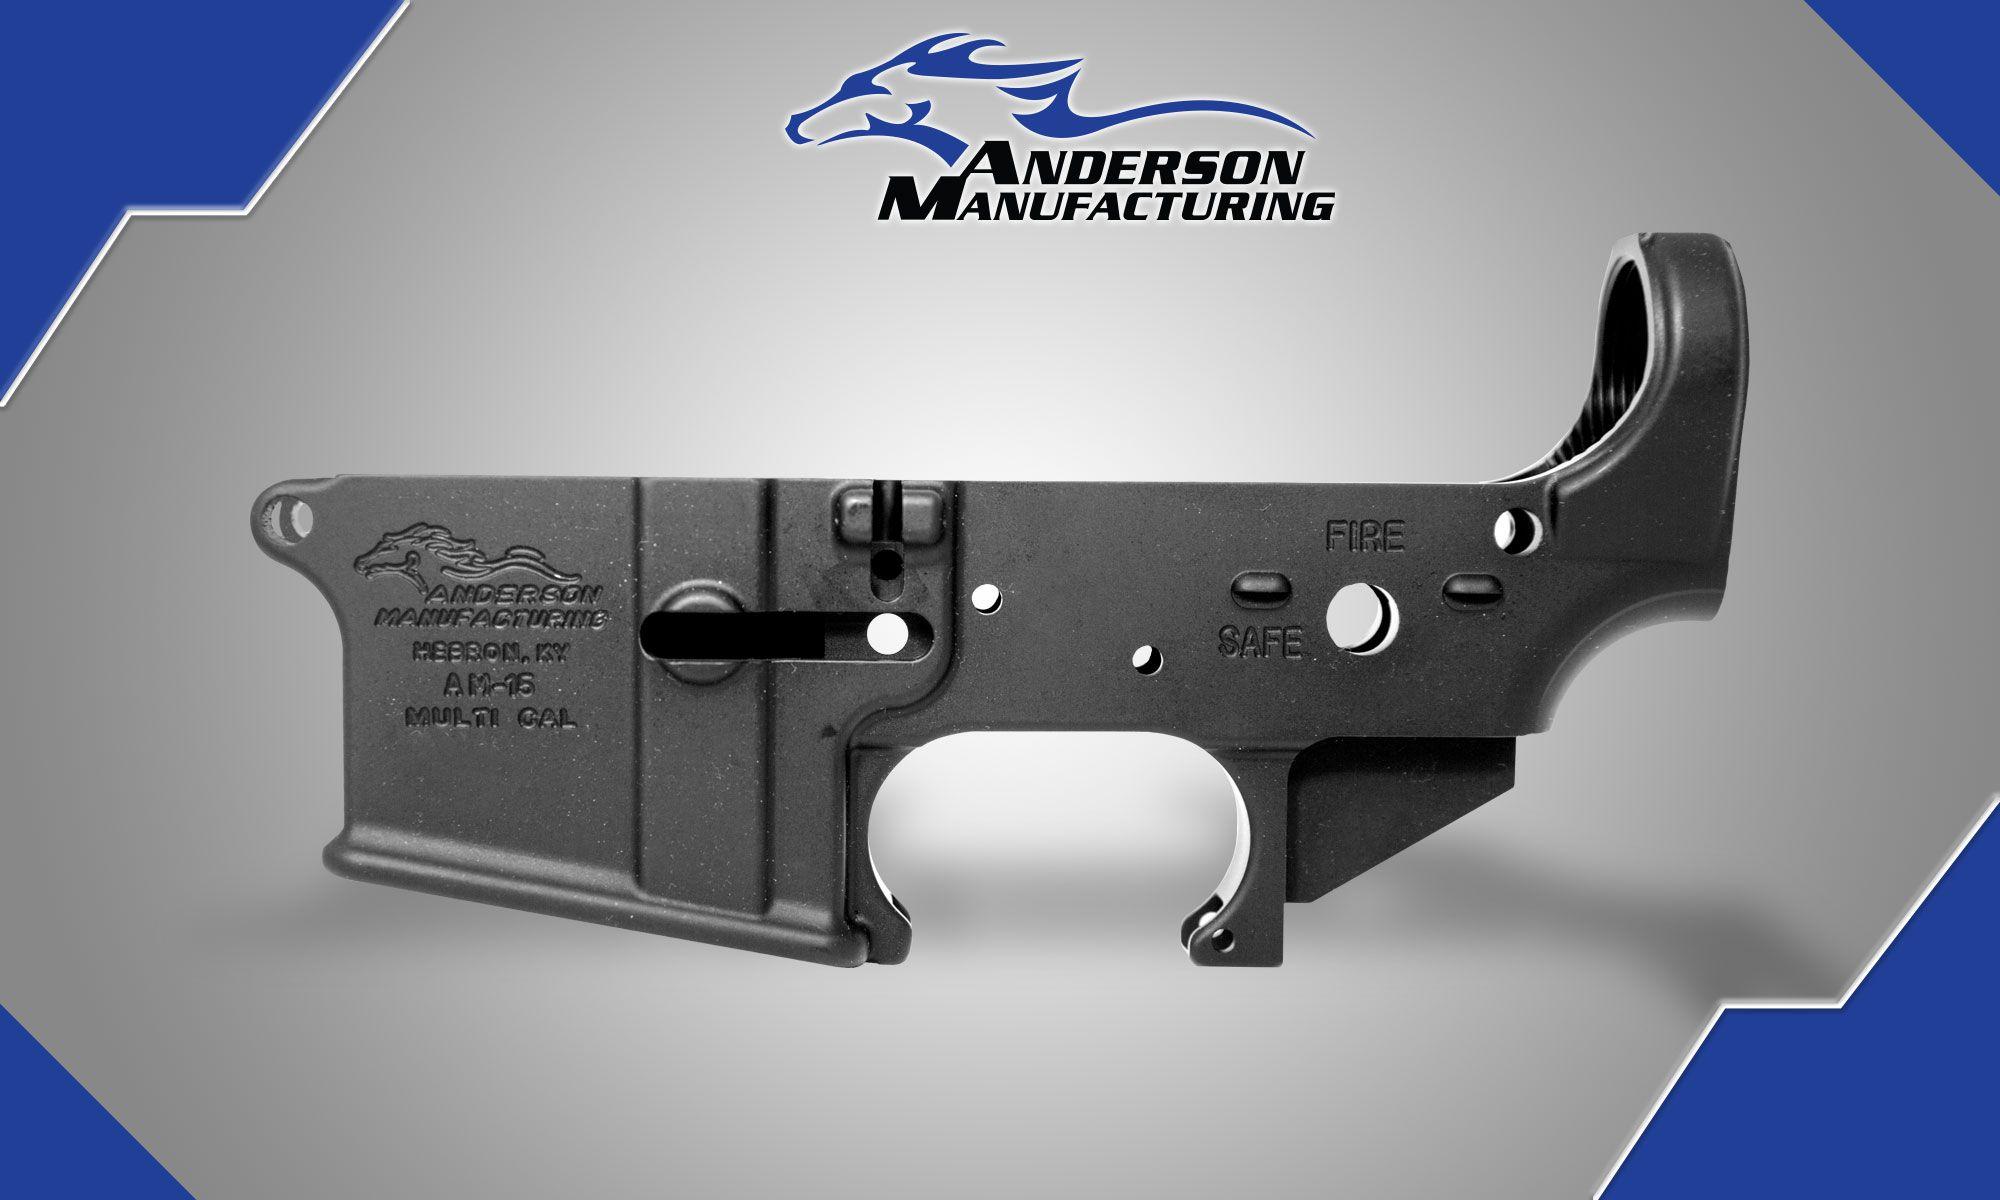 Stripped Y Logo - AM-15 Stripped Lower Receiver - Anderson Manufacturing